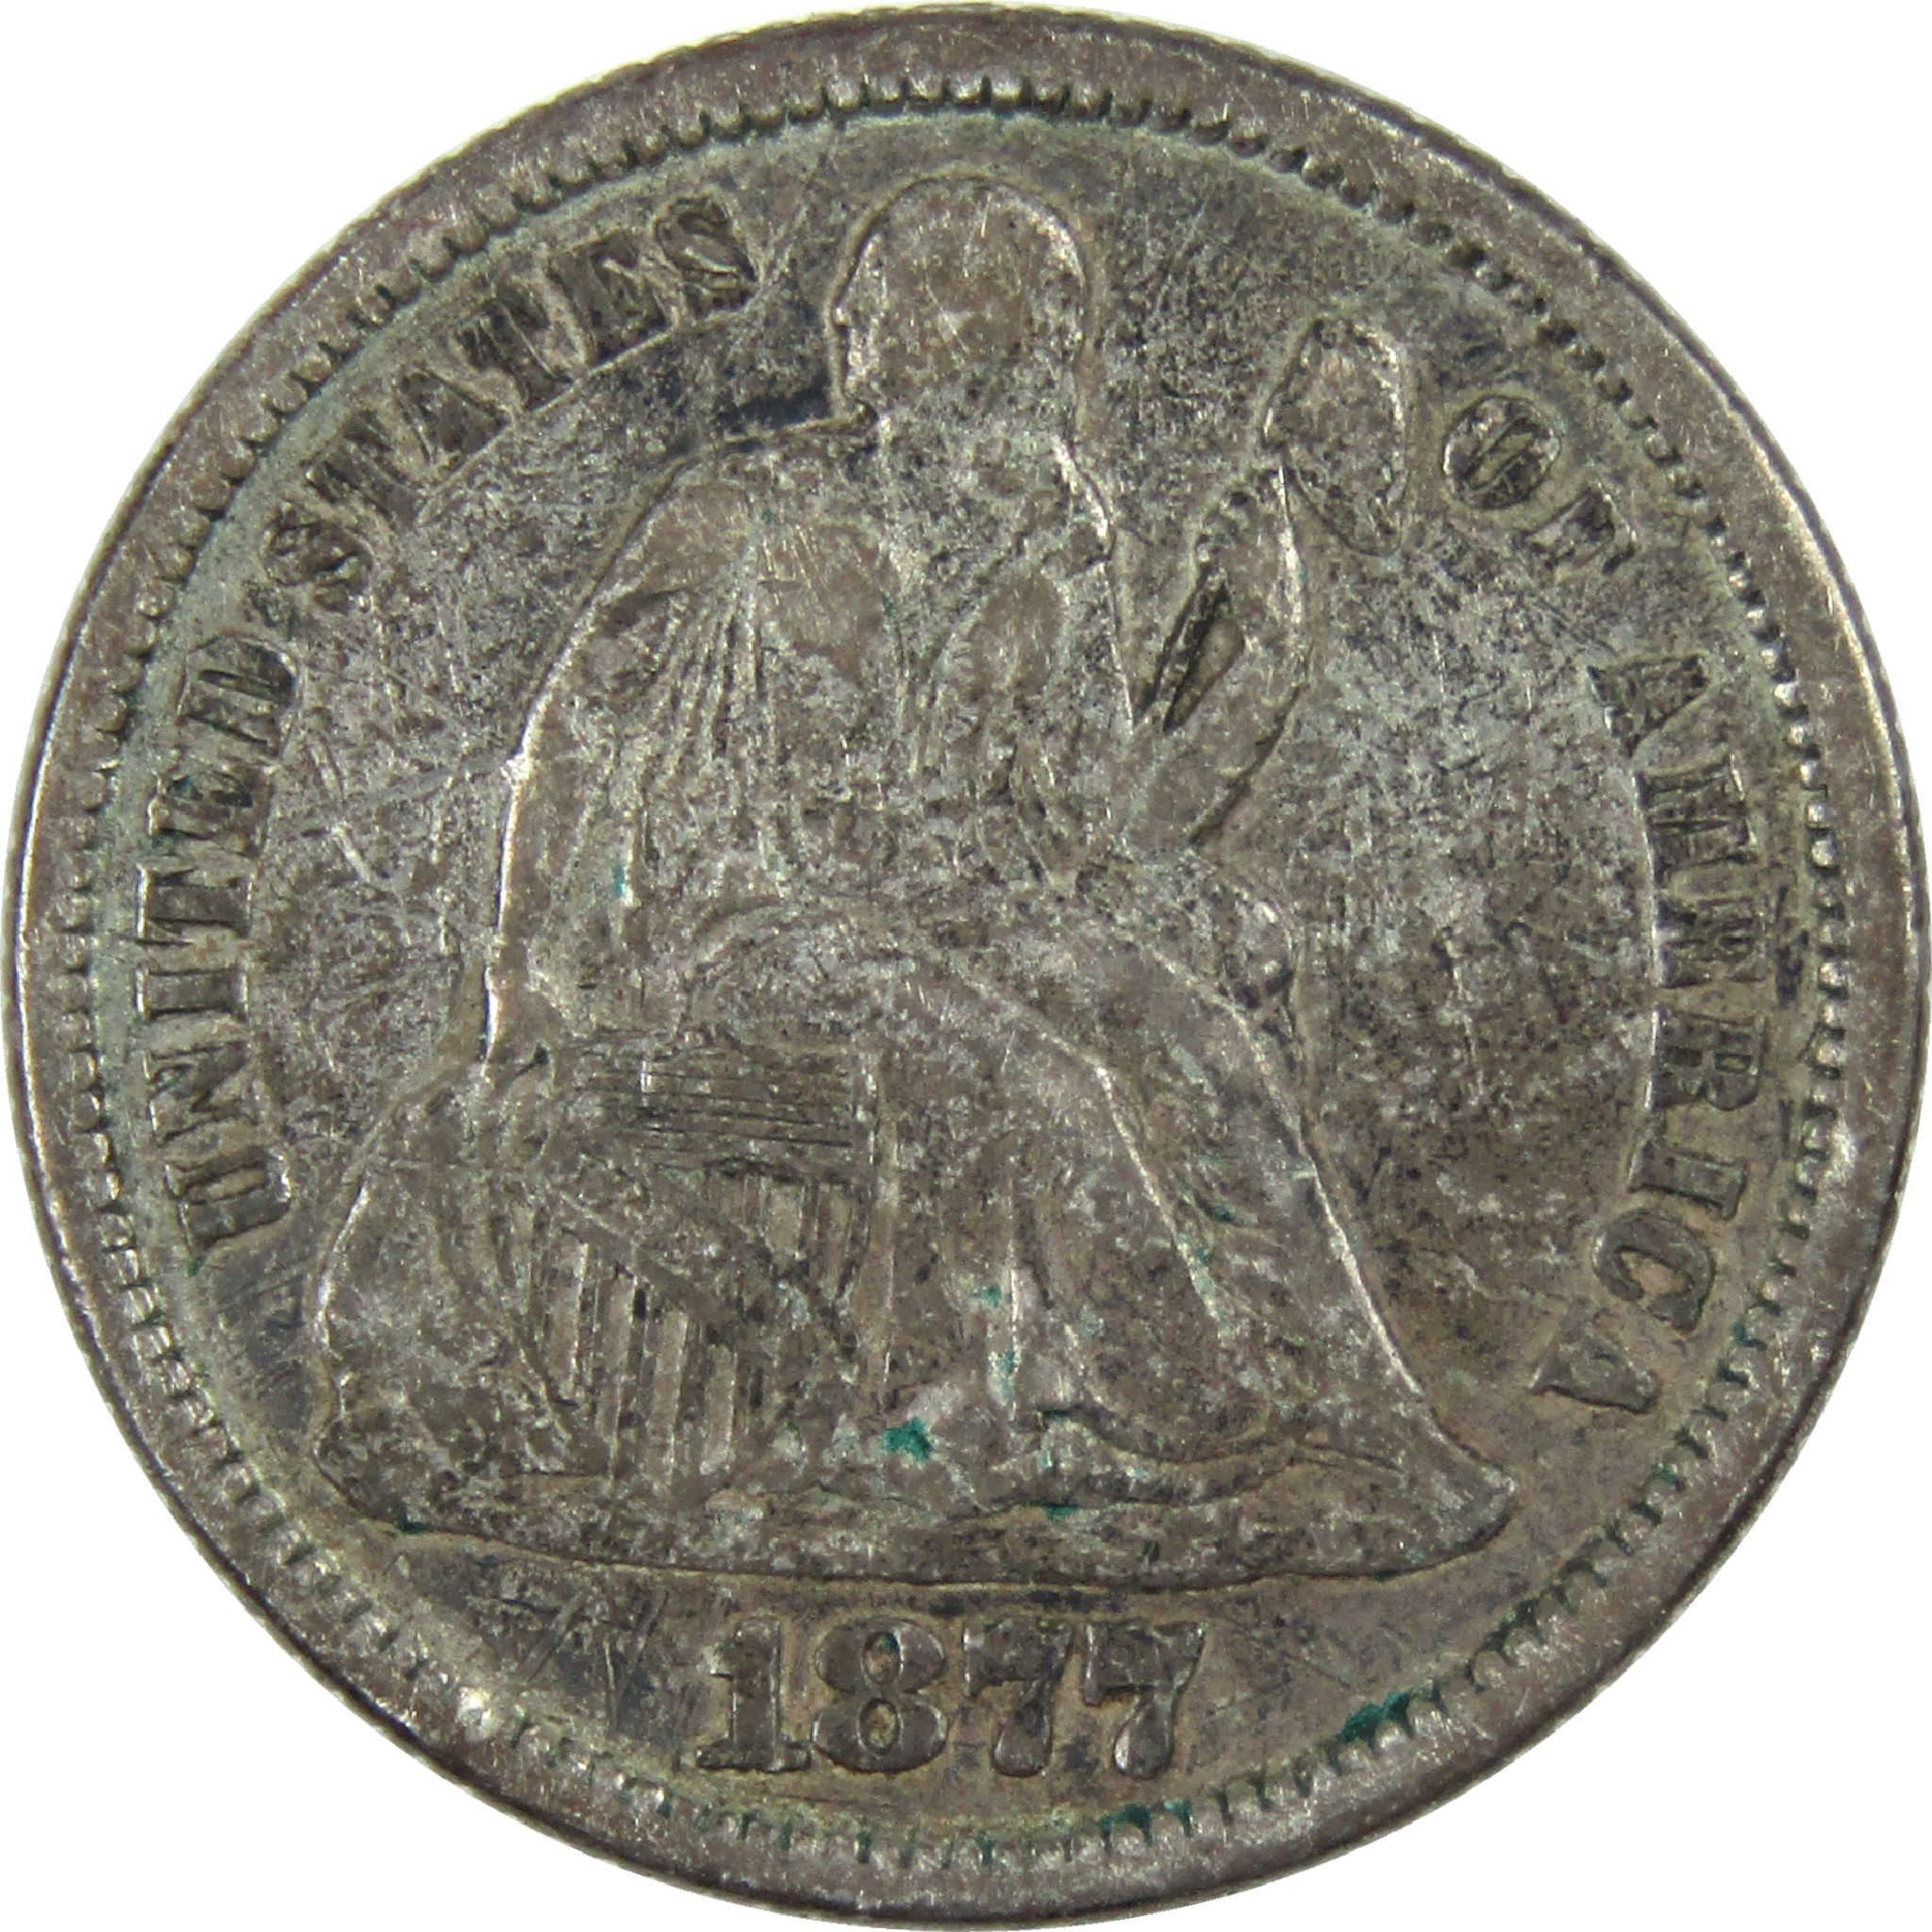 1877 Seated Liberty Dime VF Very Fine Silver 10c Coin SKU:I12275